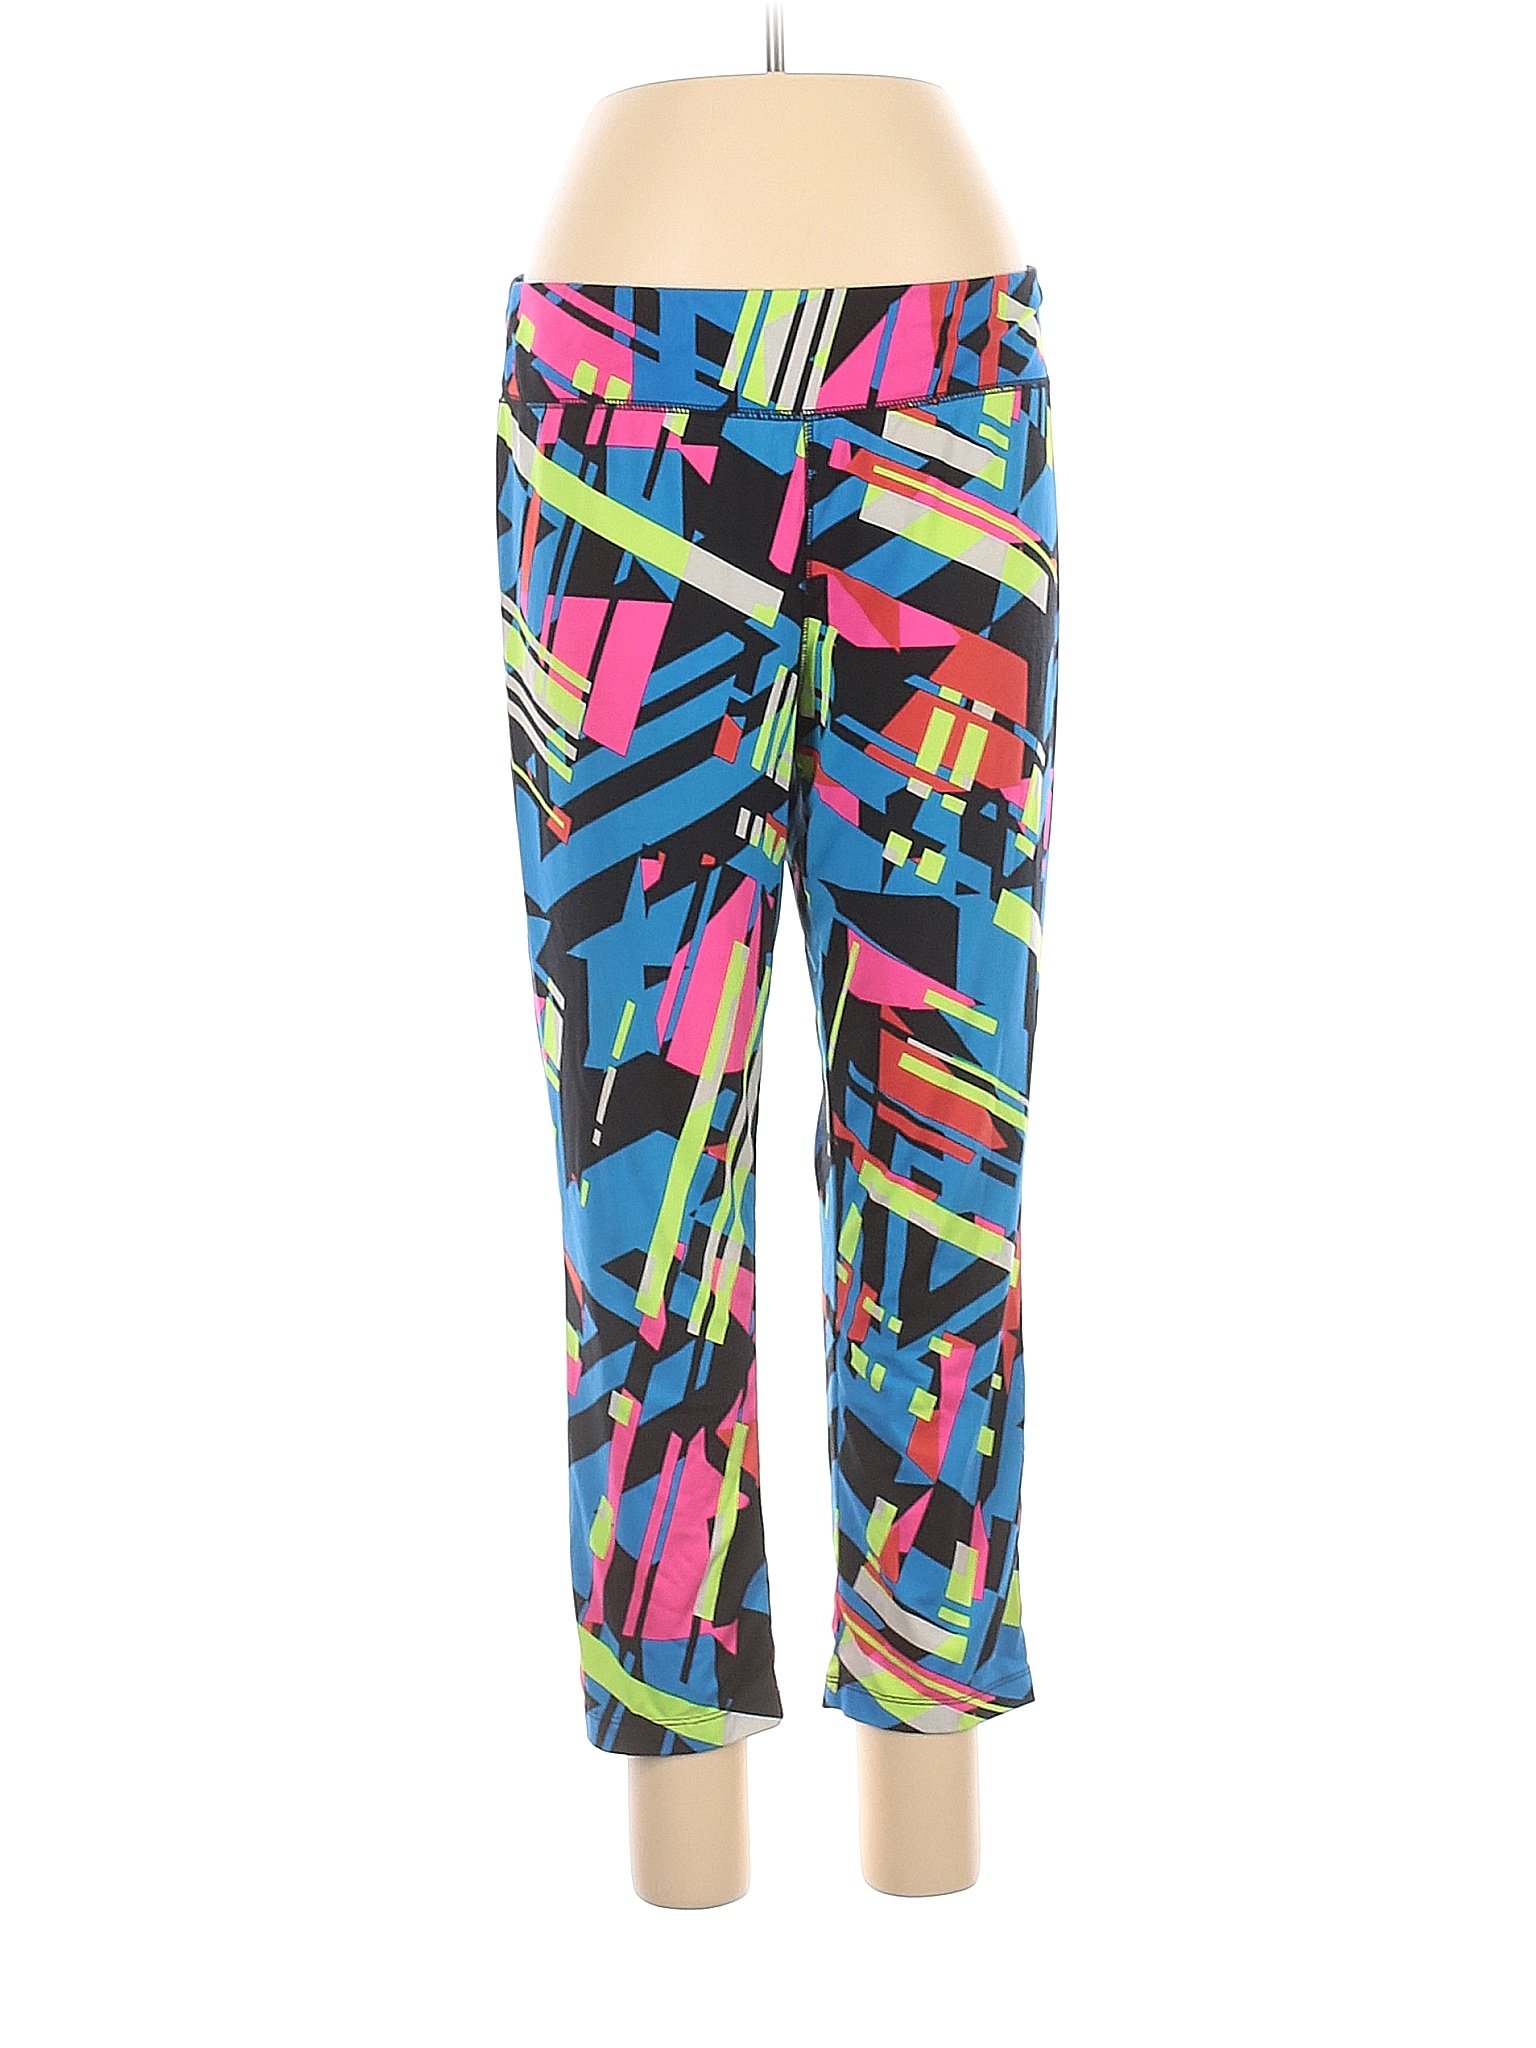 Flirtitude Juniors Activewear On Sale Up To 90% Off Retail